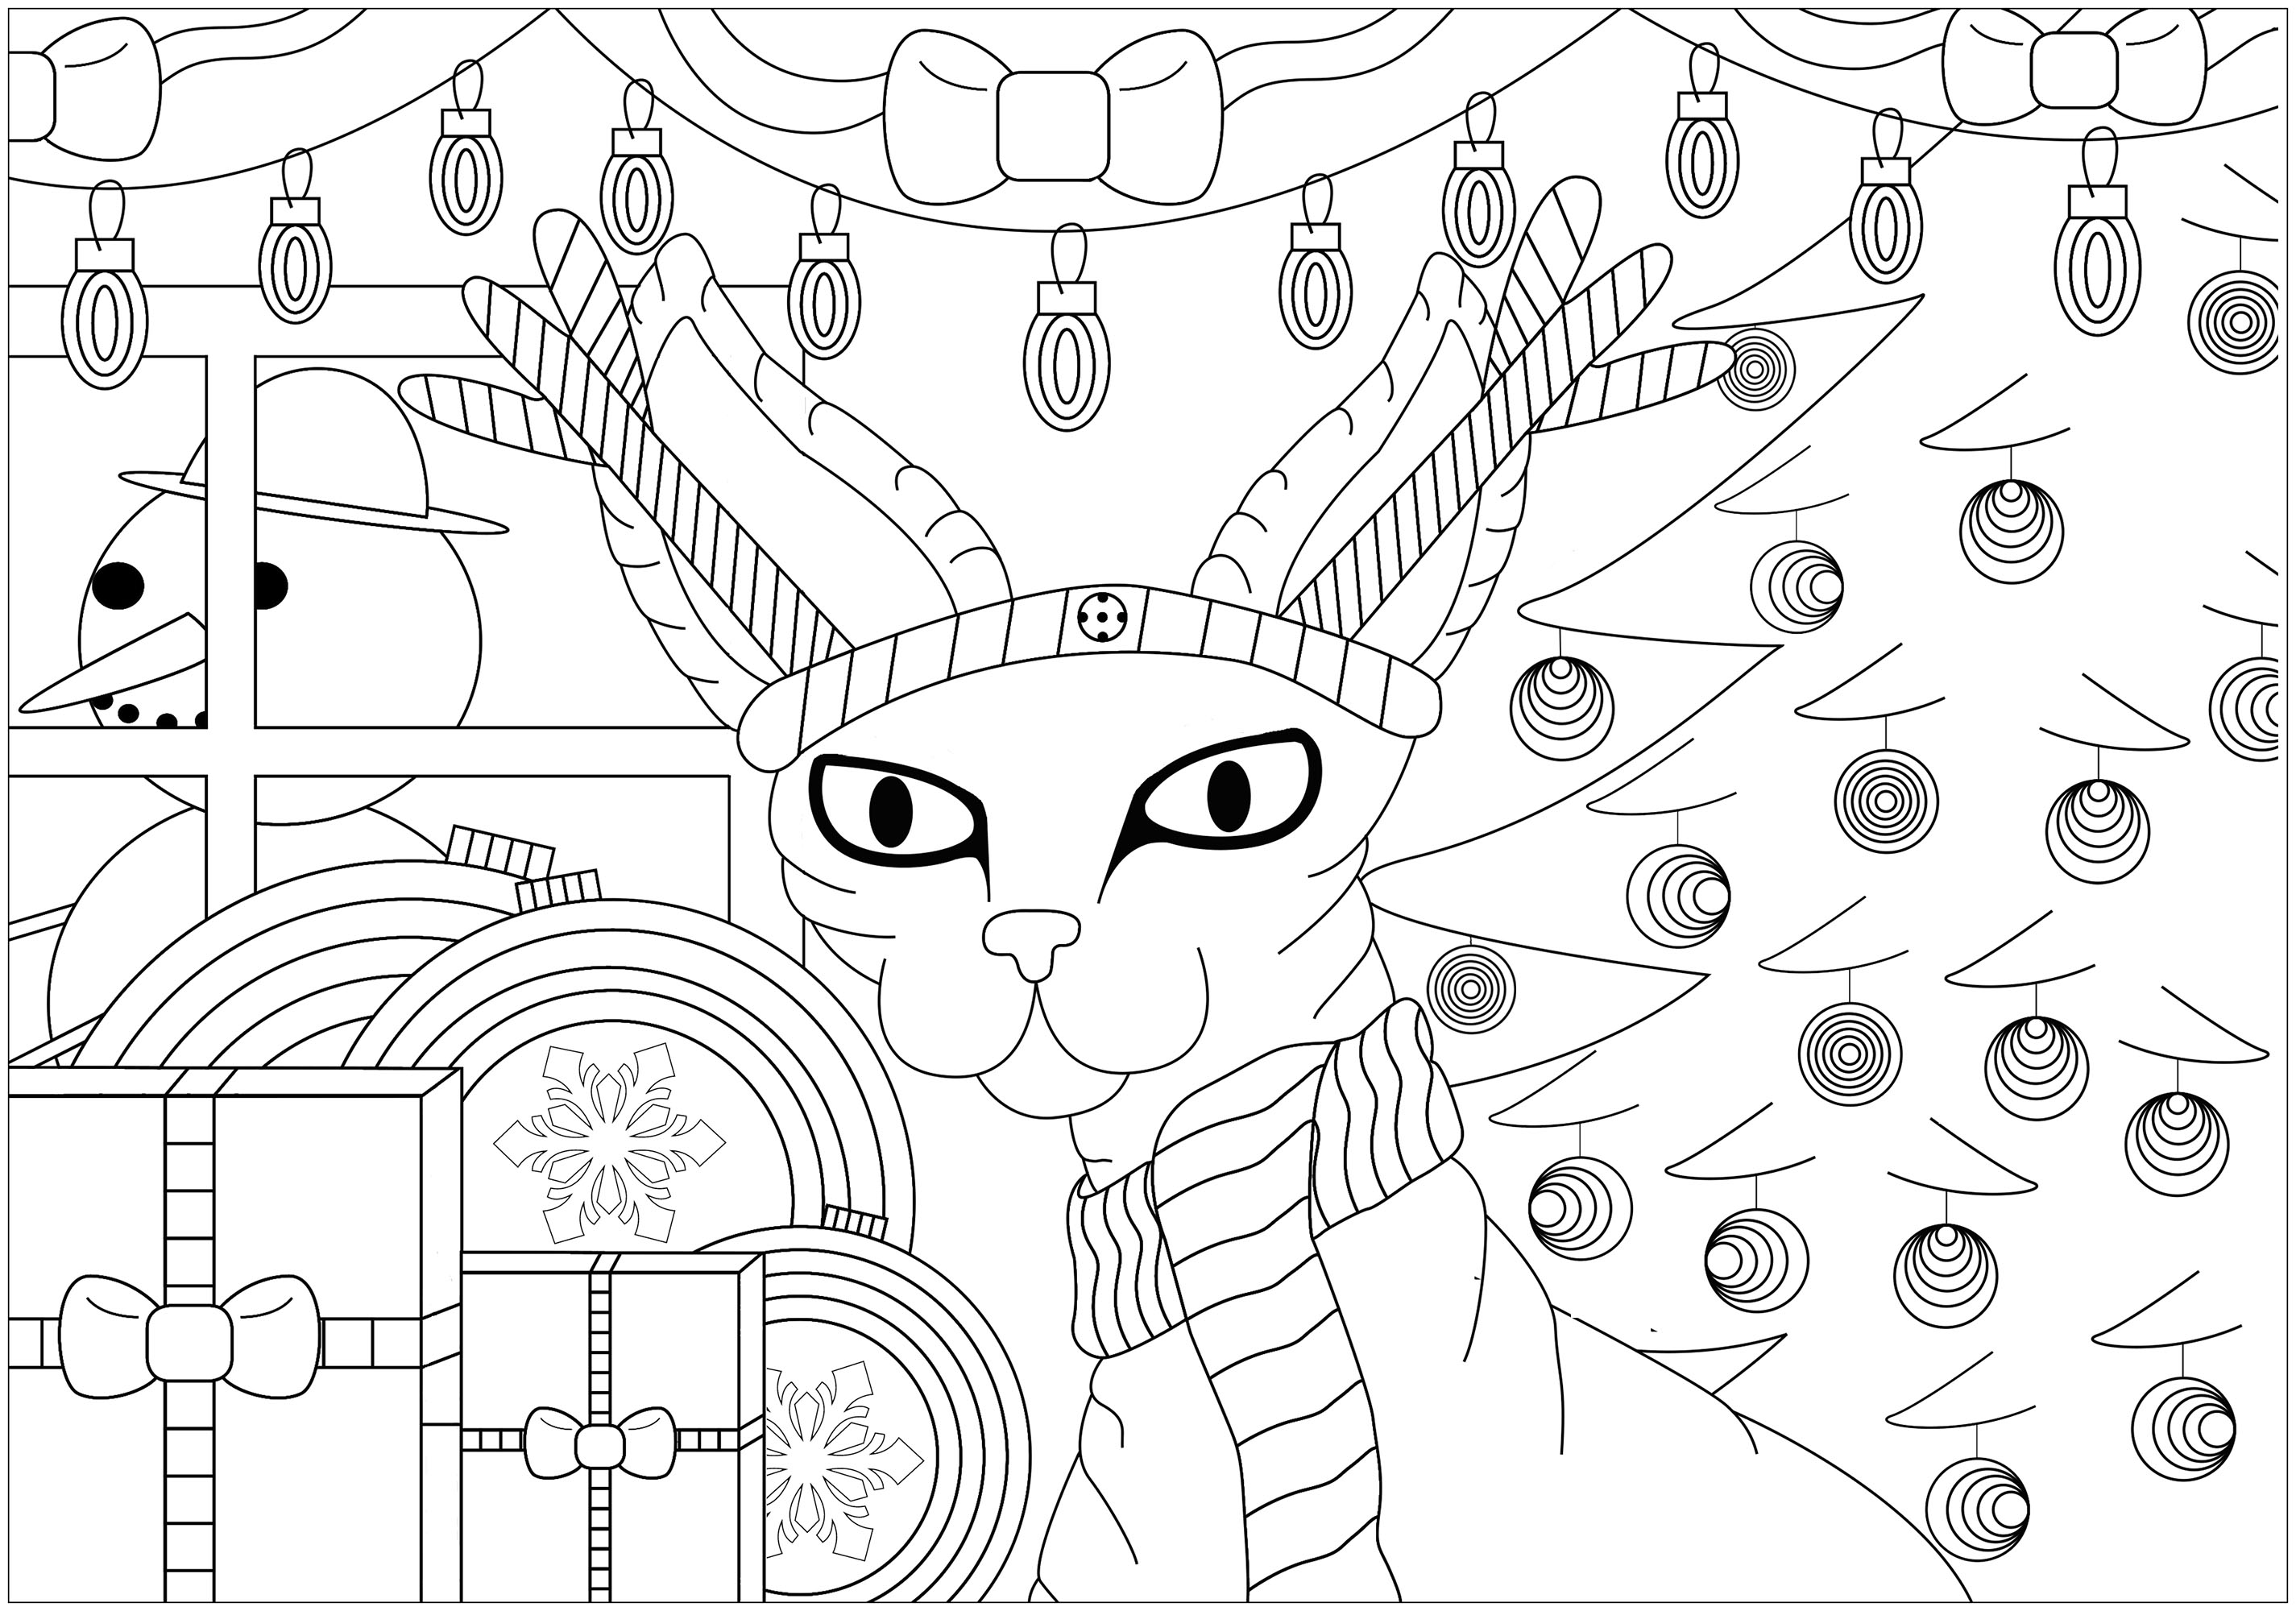 Christmas cat   Christmas Adult Coloring Pages